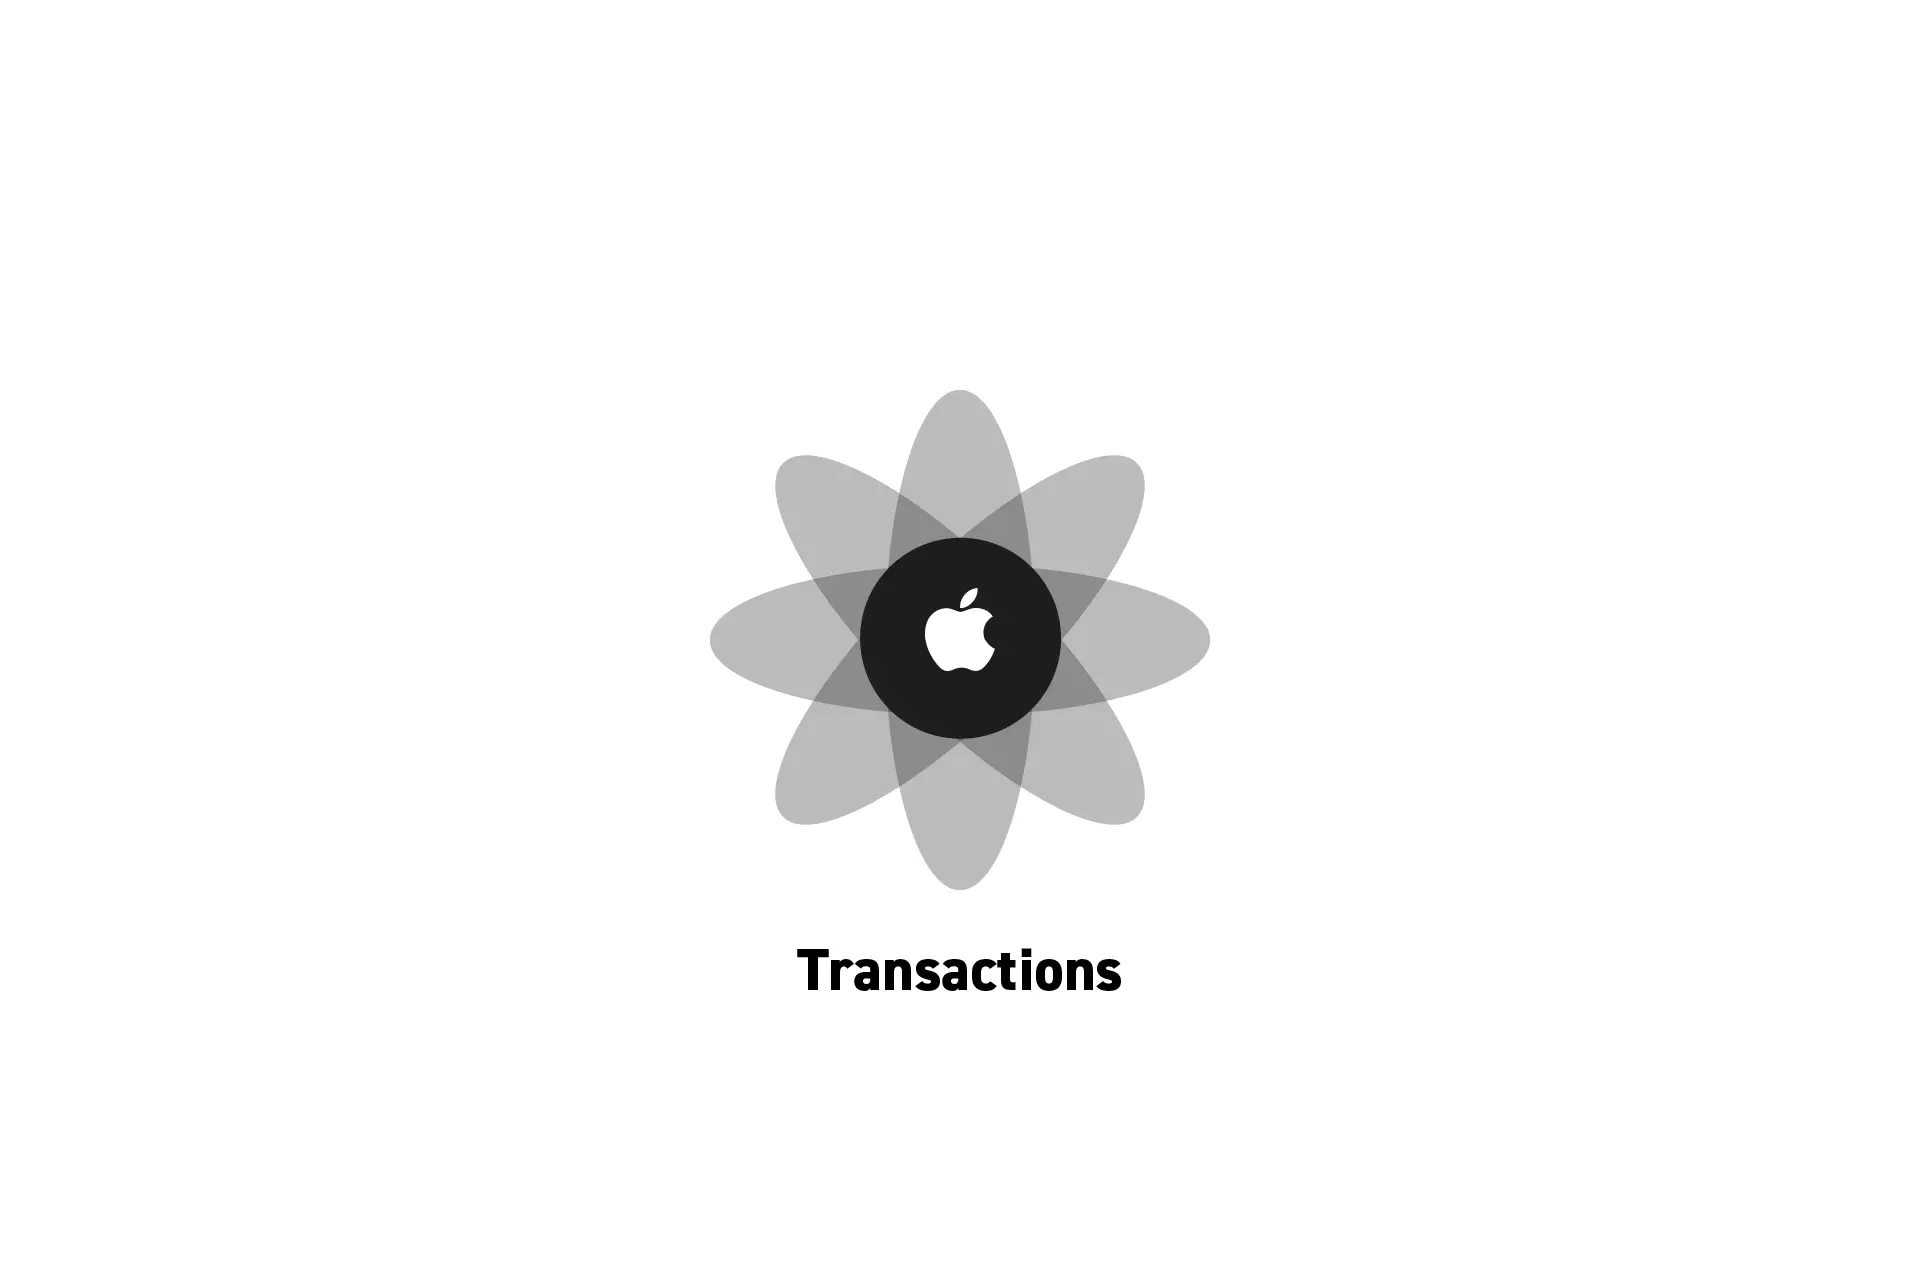 A flower that represents Apple with the text "Transactions" beneath it.